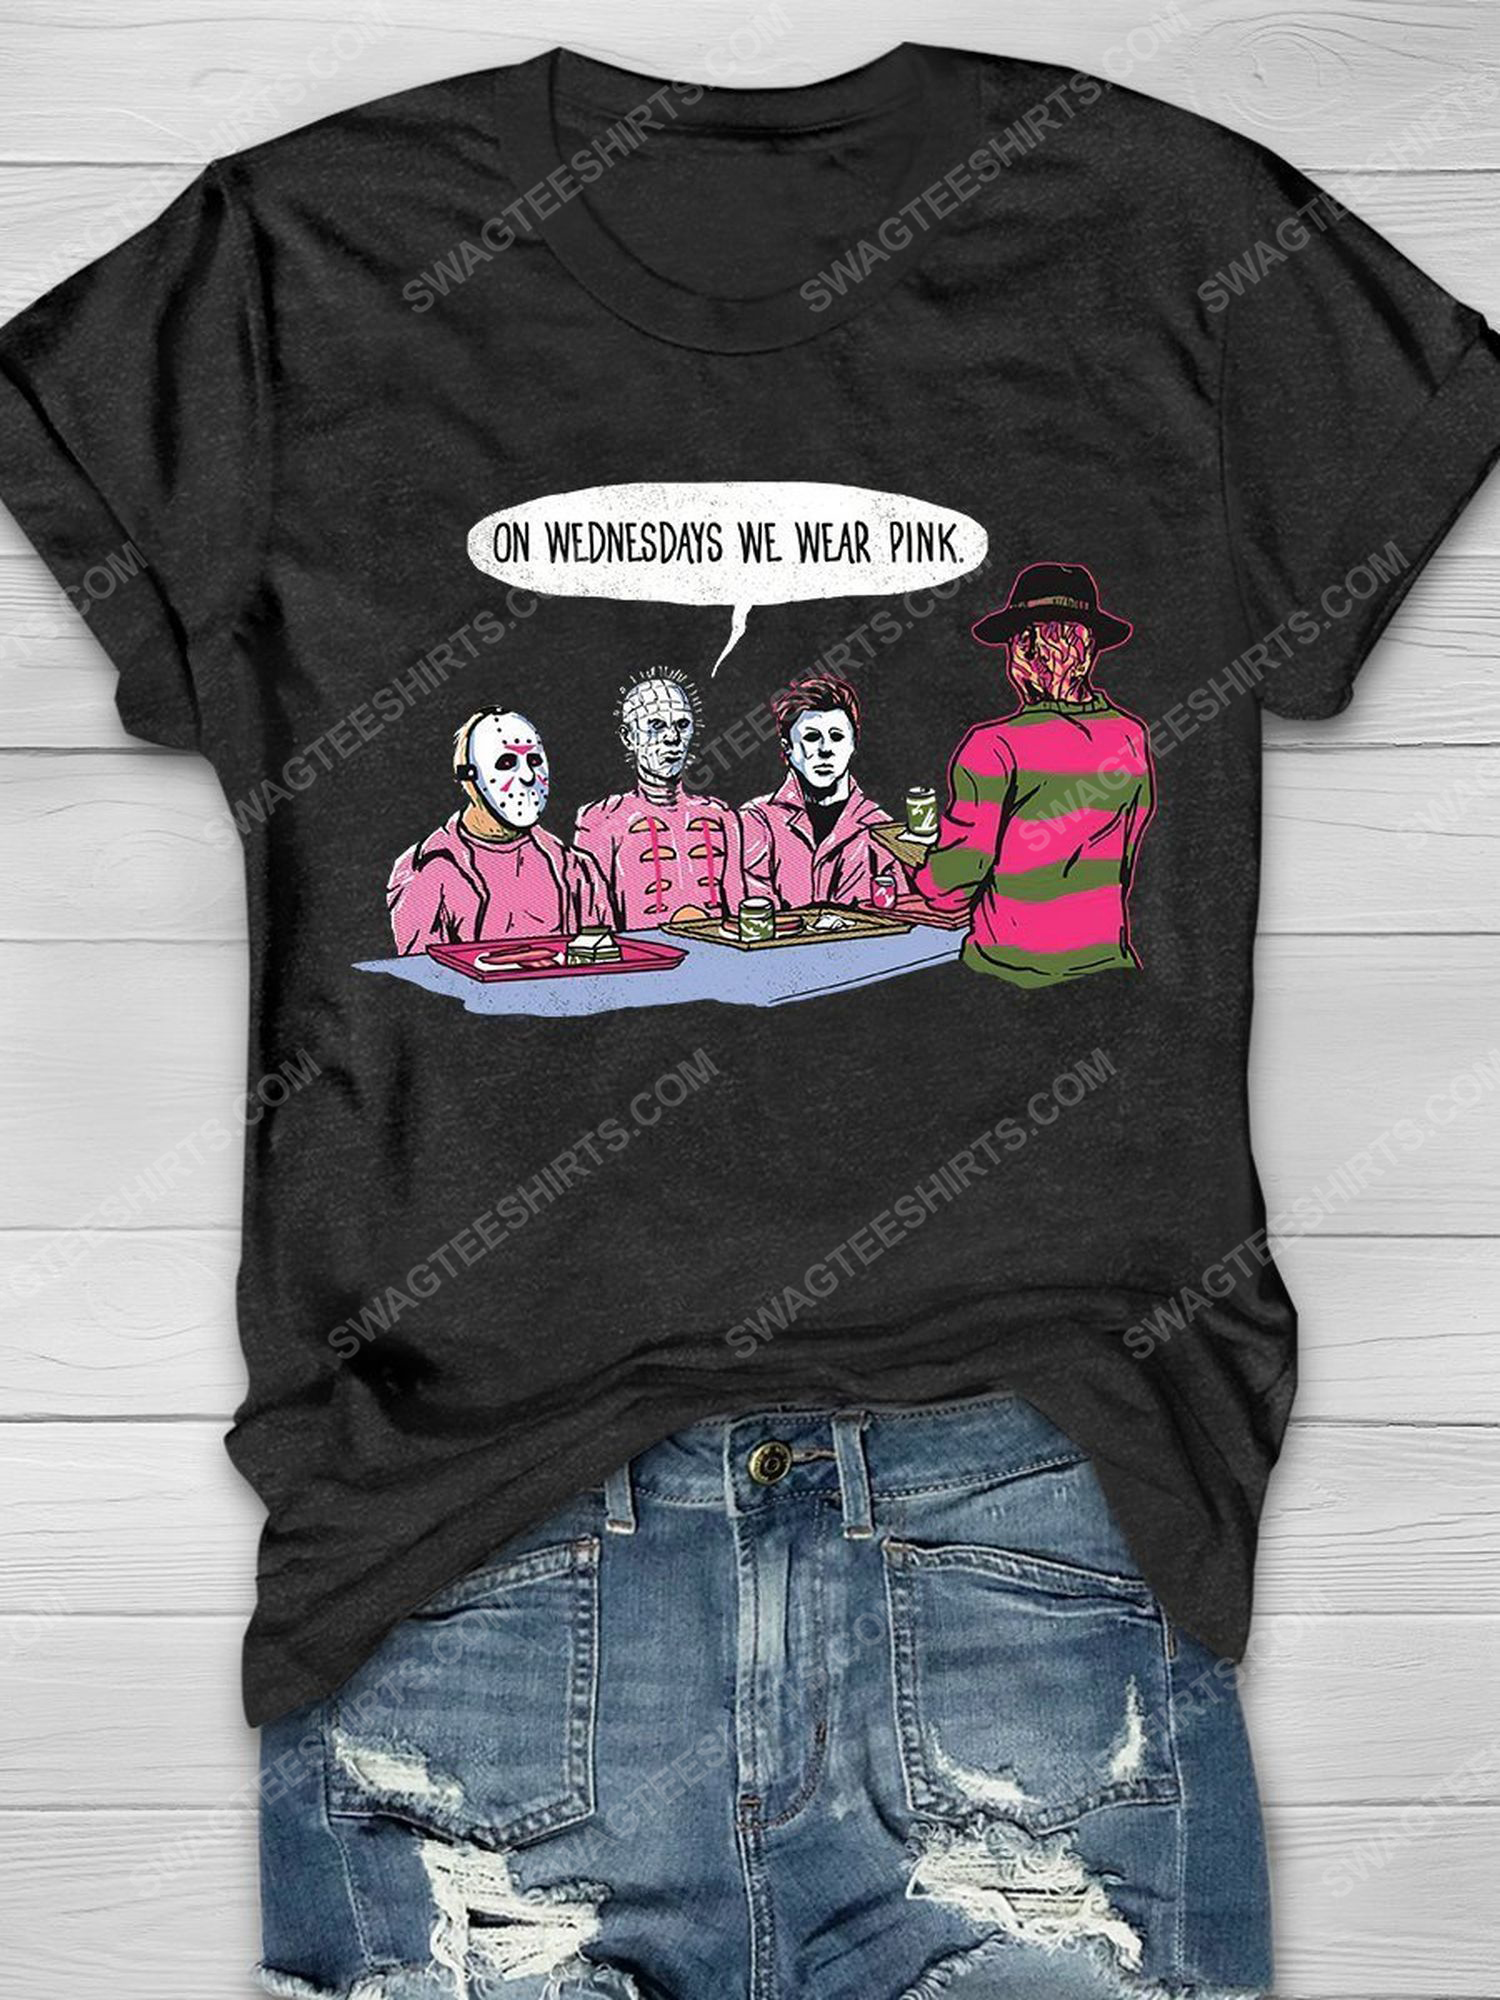 Breast cancer awareness on wednesdays we wear pink horror characters shirt